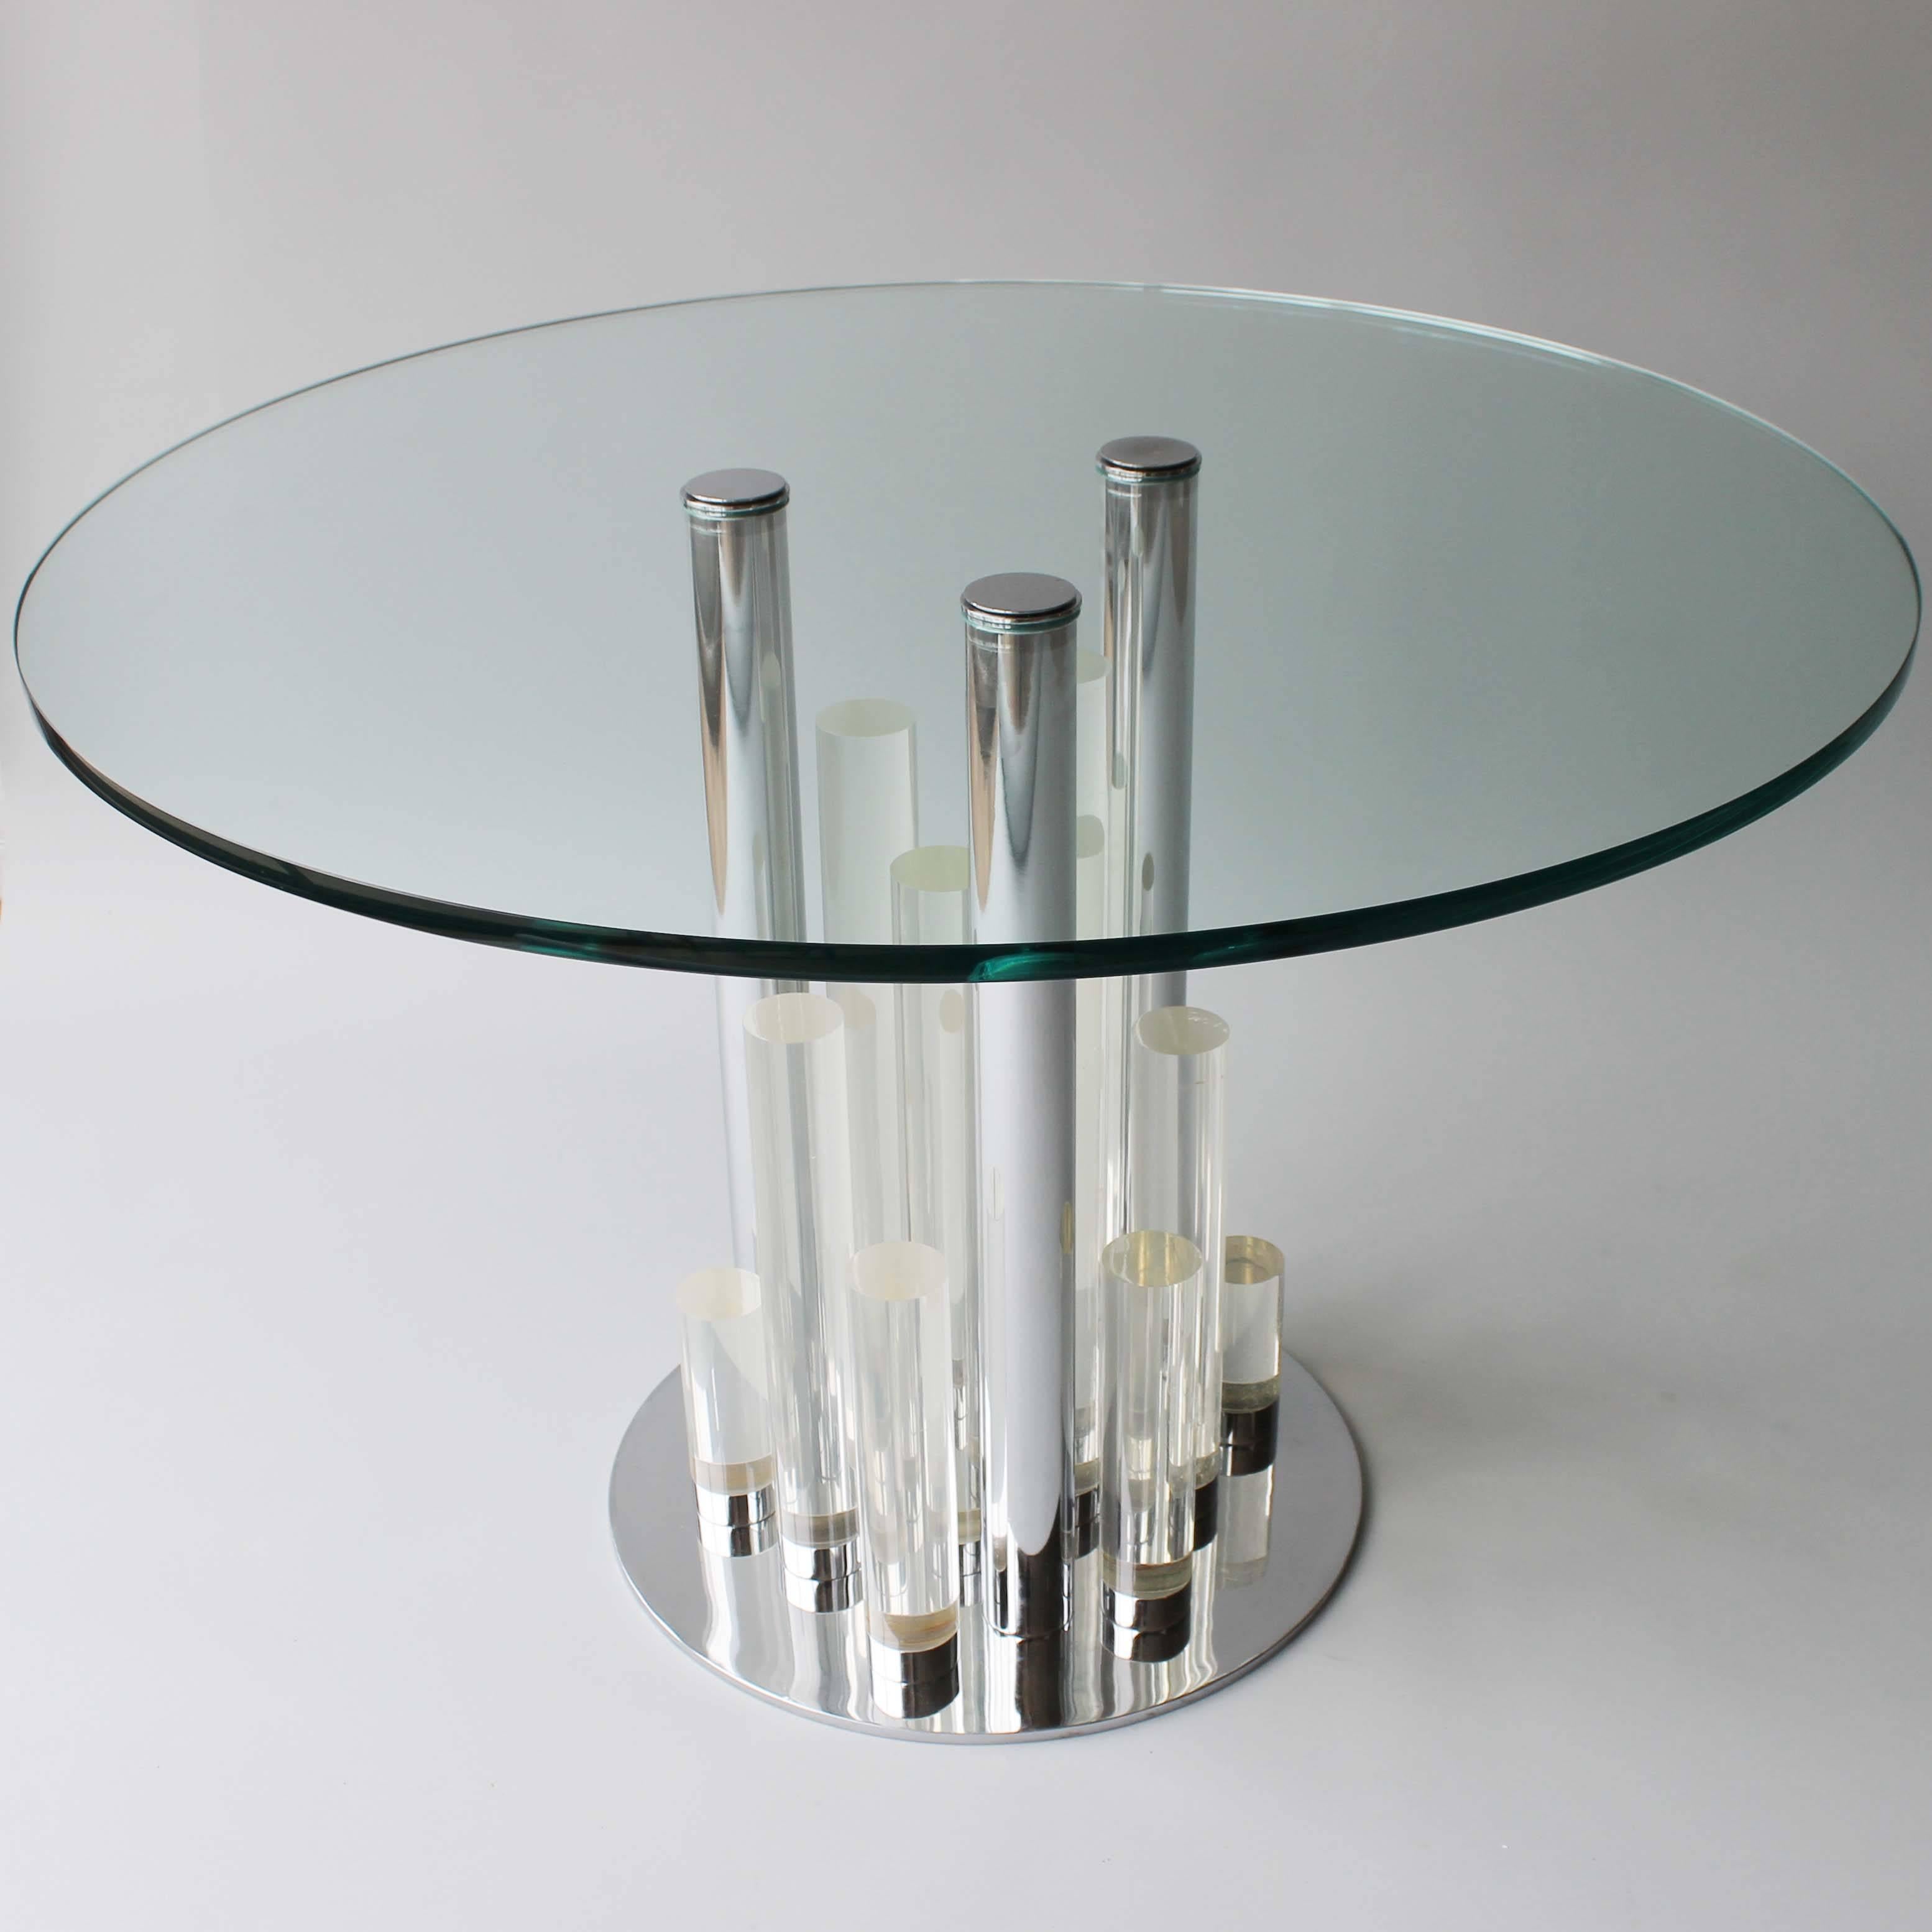 Stunning Lucite and chrome table with original 3/4 inch glass top designed by Charles Hollis Jones.